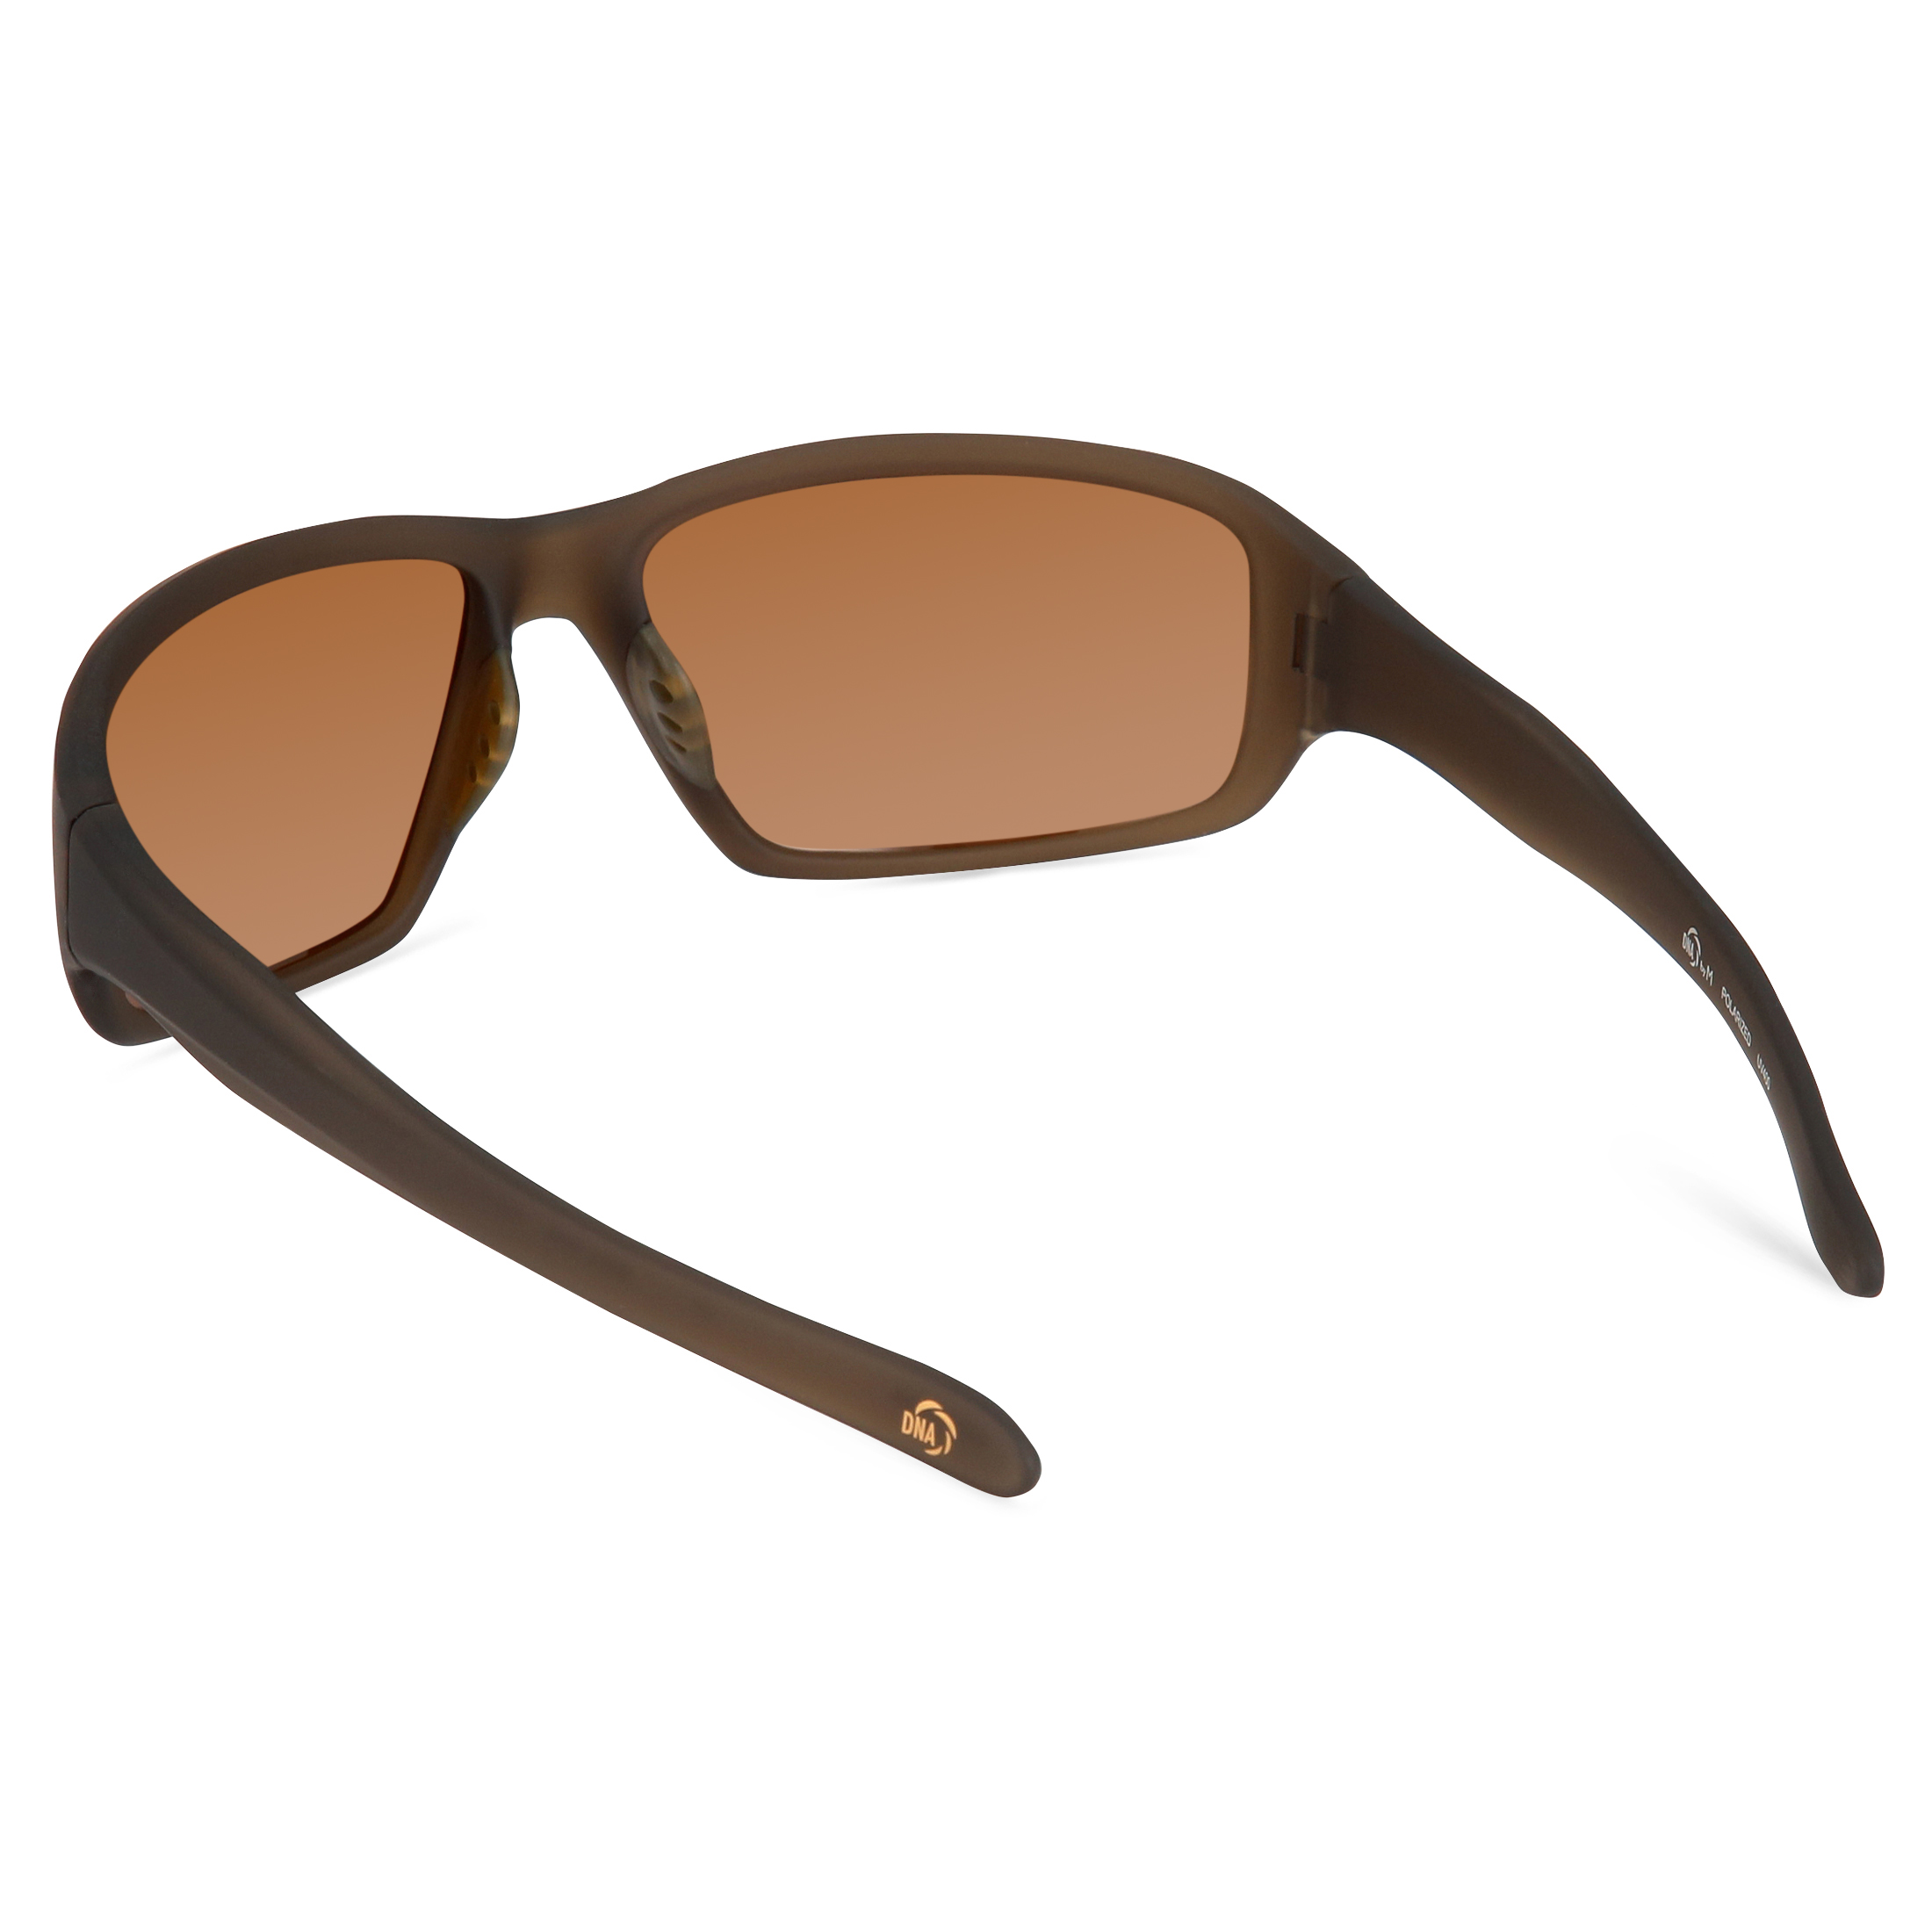 DNA Polarized Sunglasses, Unisex, A3012, Brown, 64-18-134 - image 5 of 6